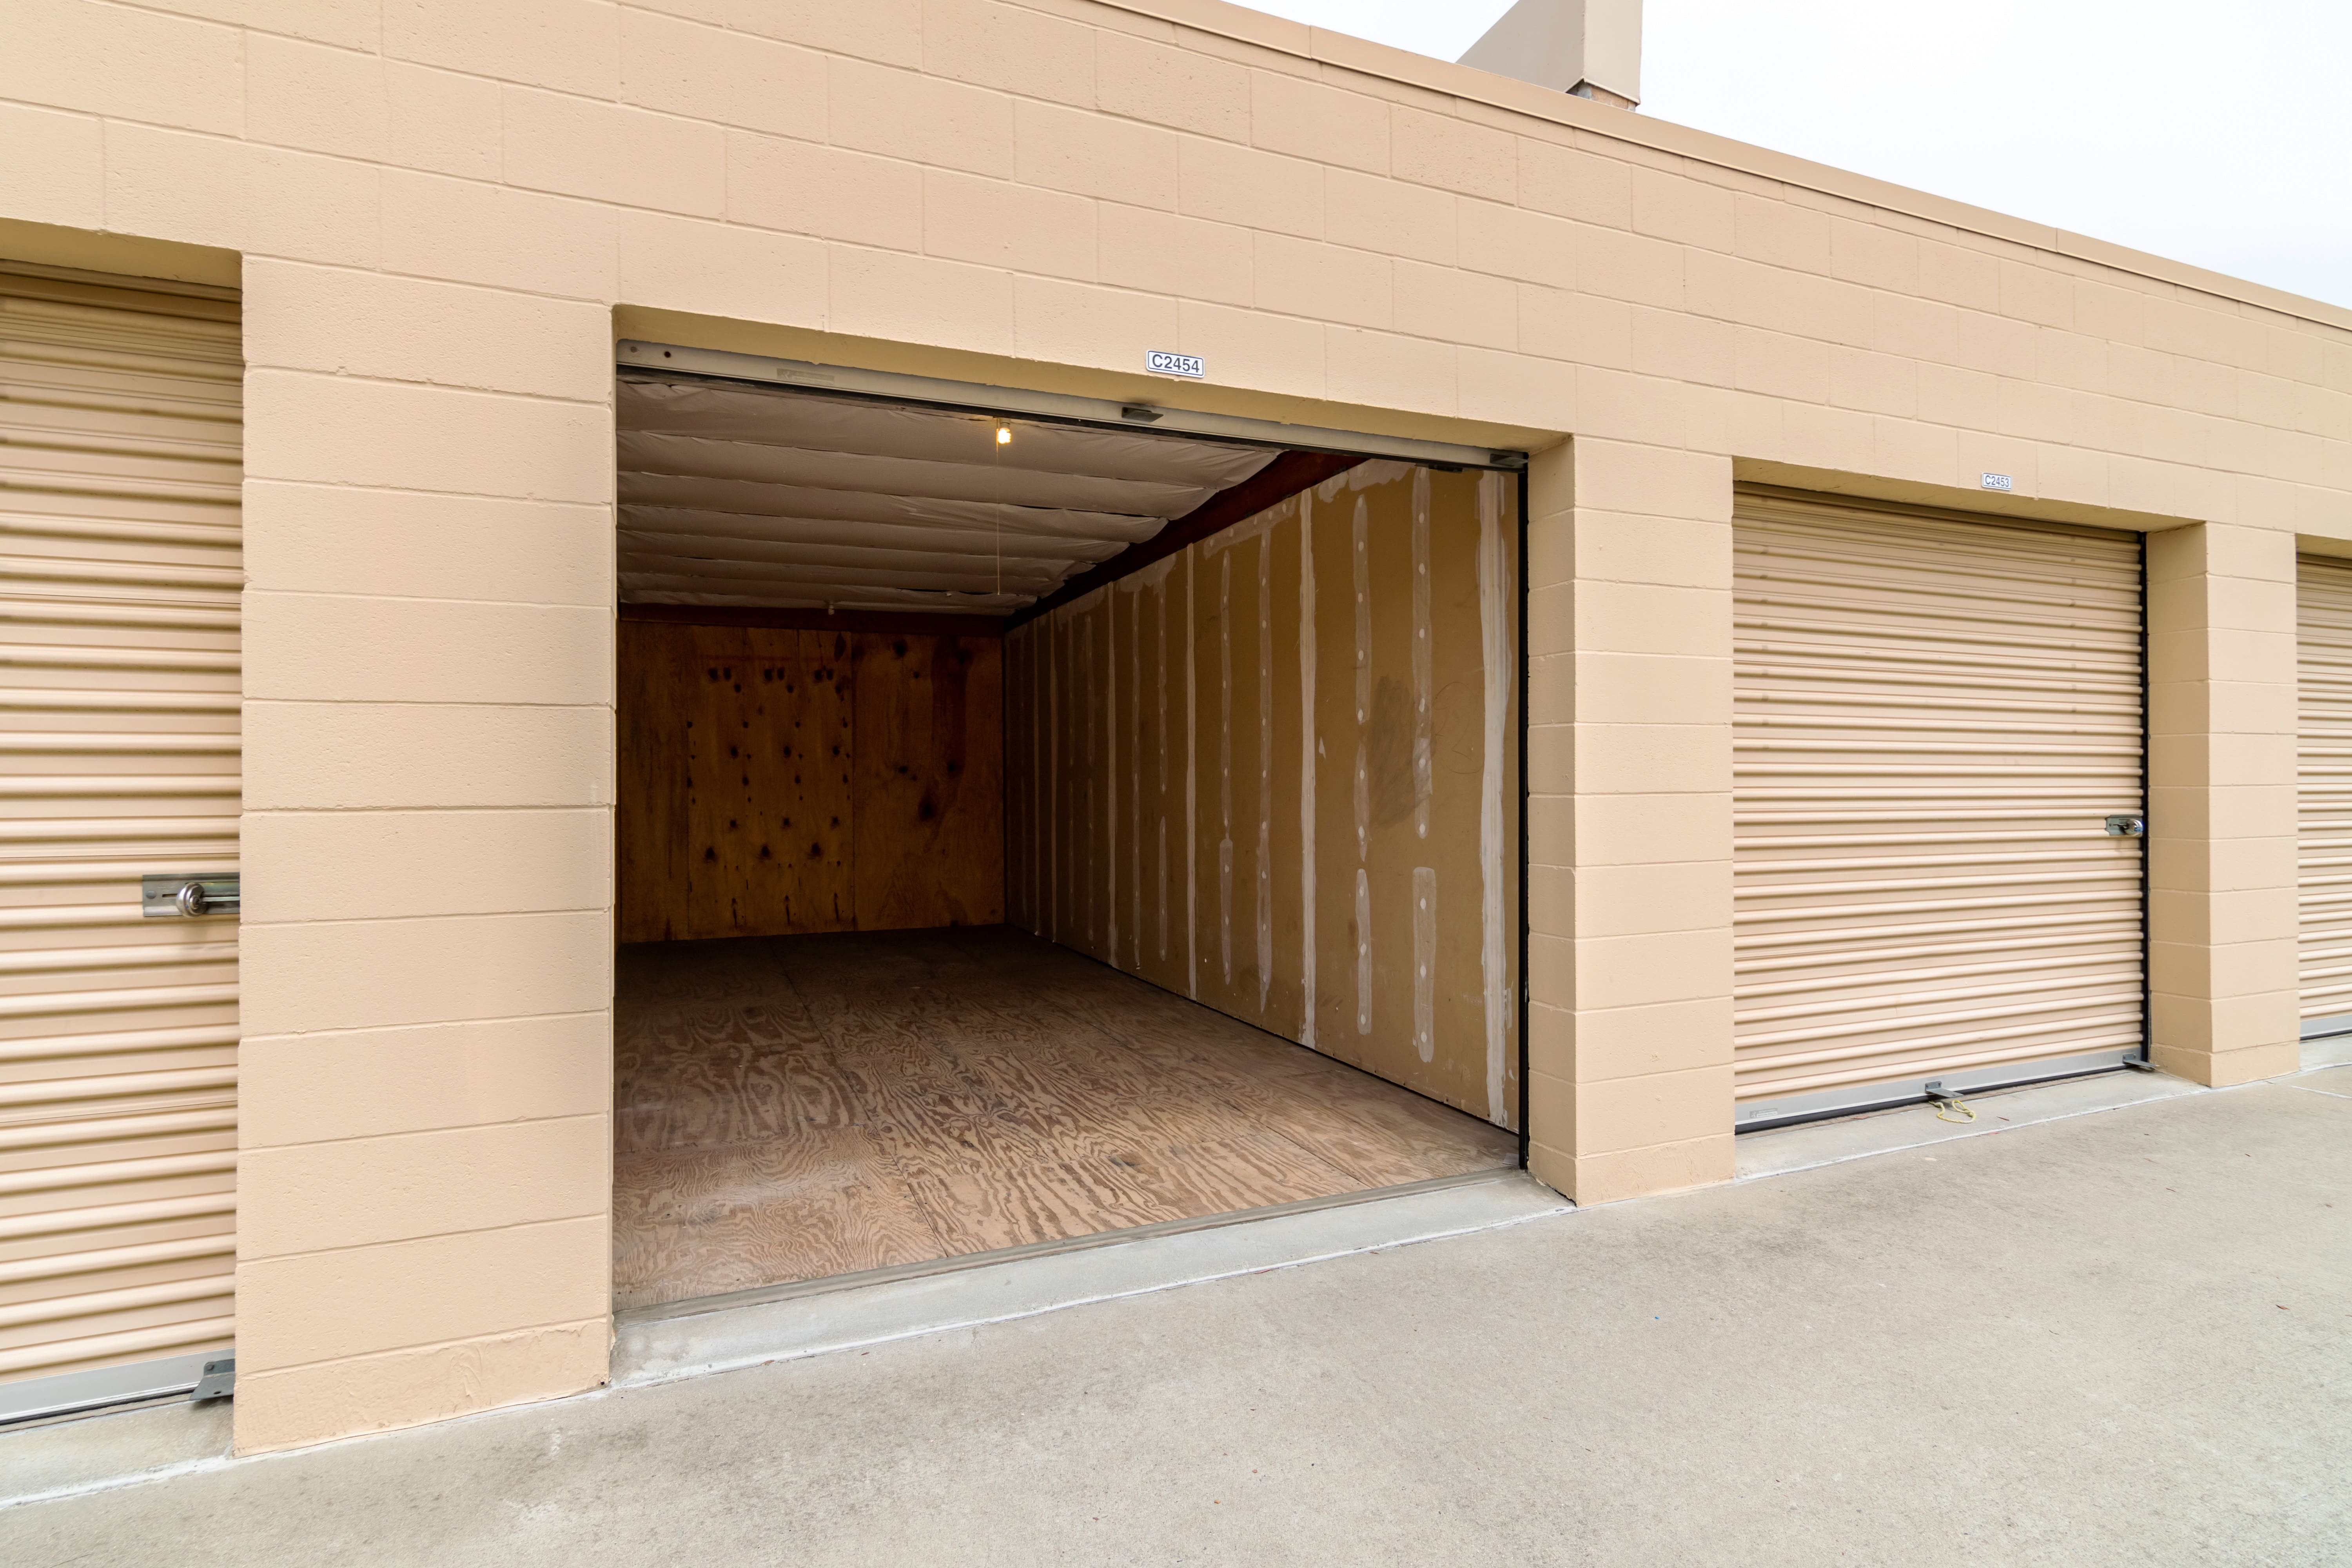 The inside of an exterior storage unit at North County Self Storage in Escondido, CA